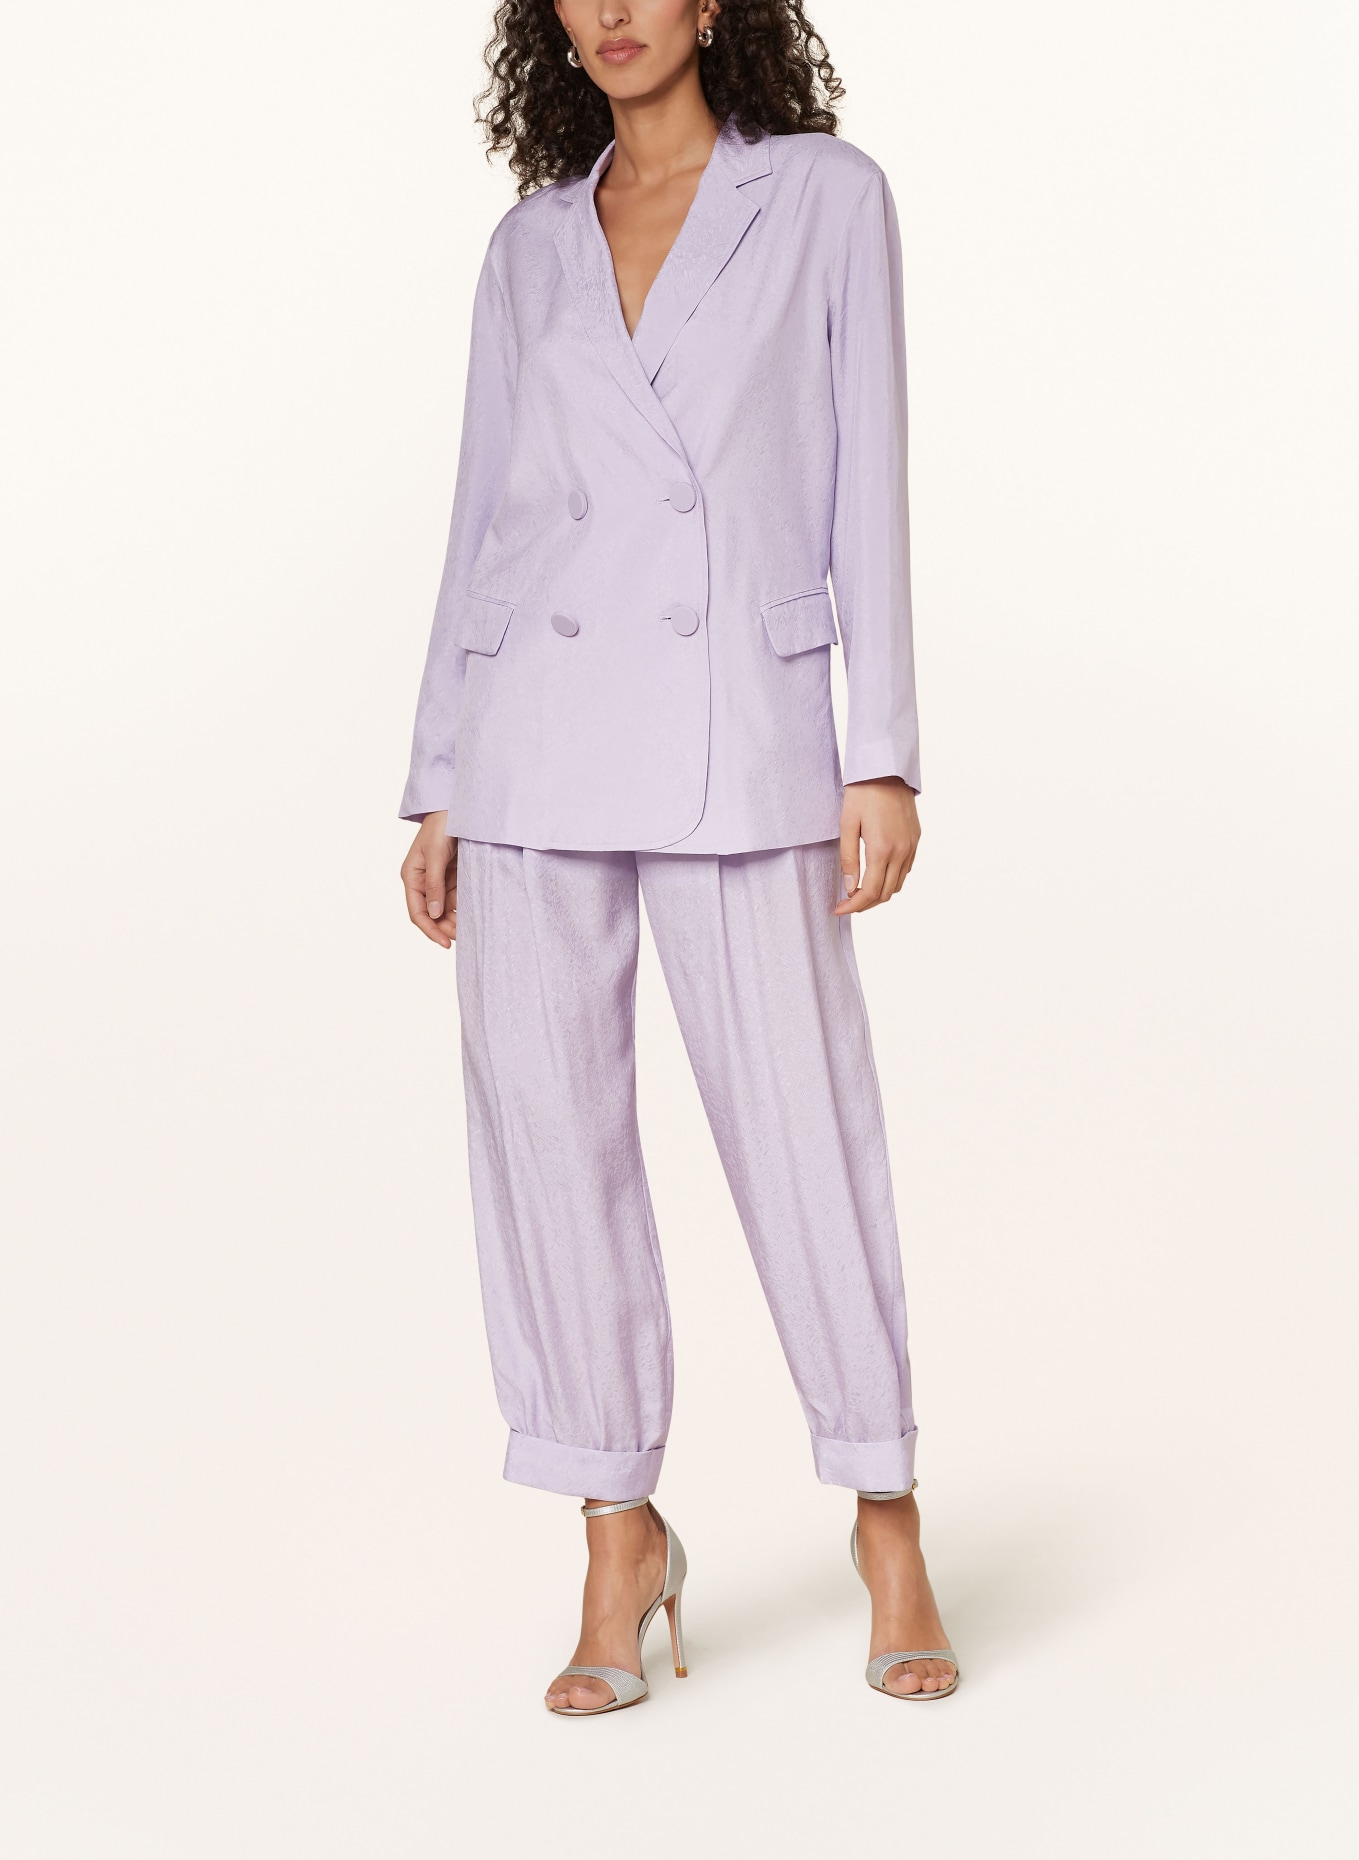 ARMANI EXCHANGE 7/8 trousers made of satin, Color: LIGHT PURPLE (Image 2)